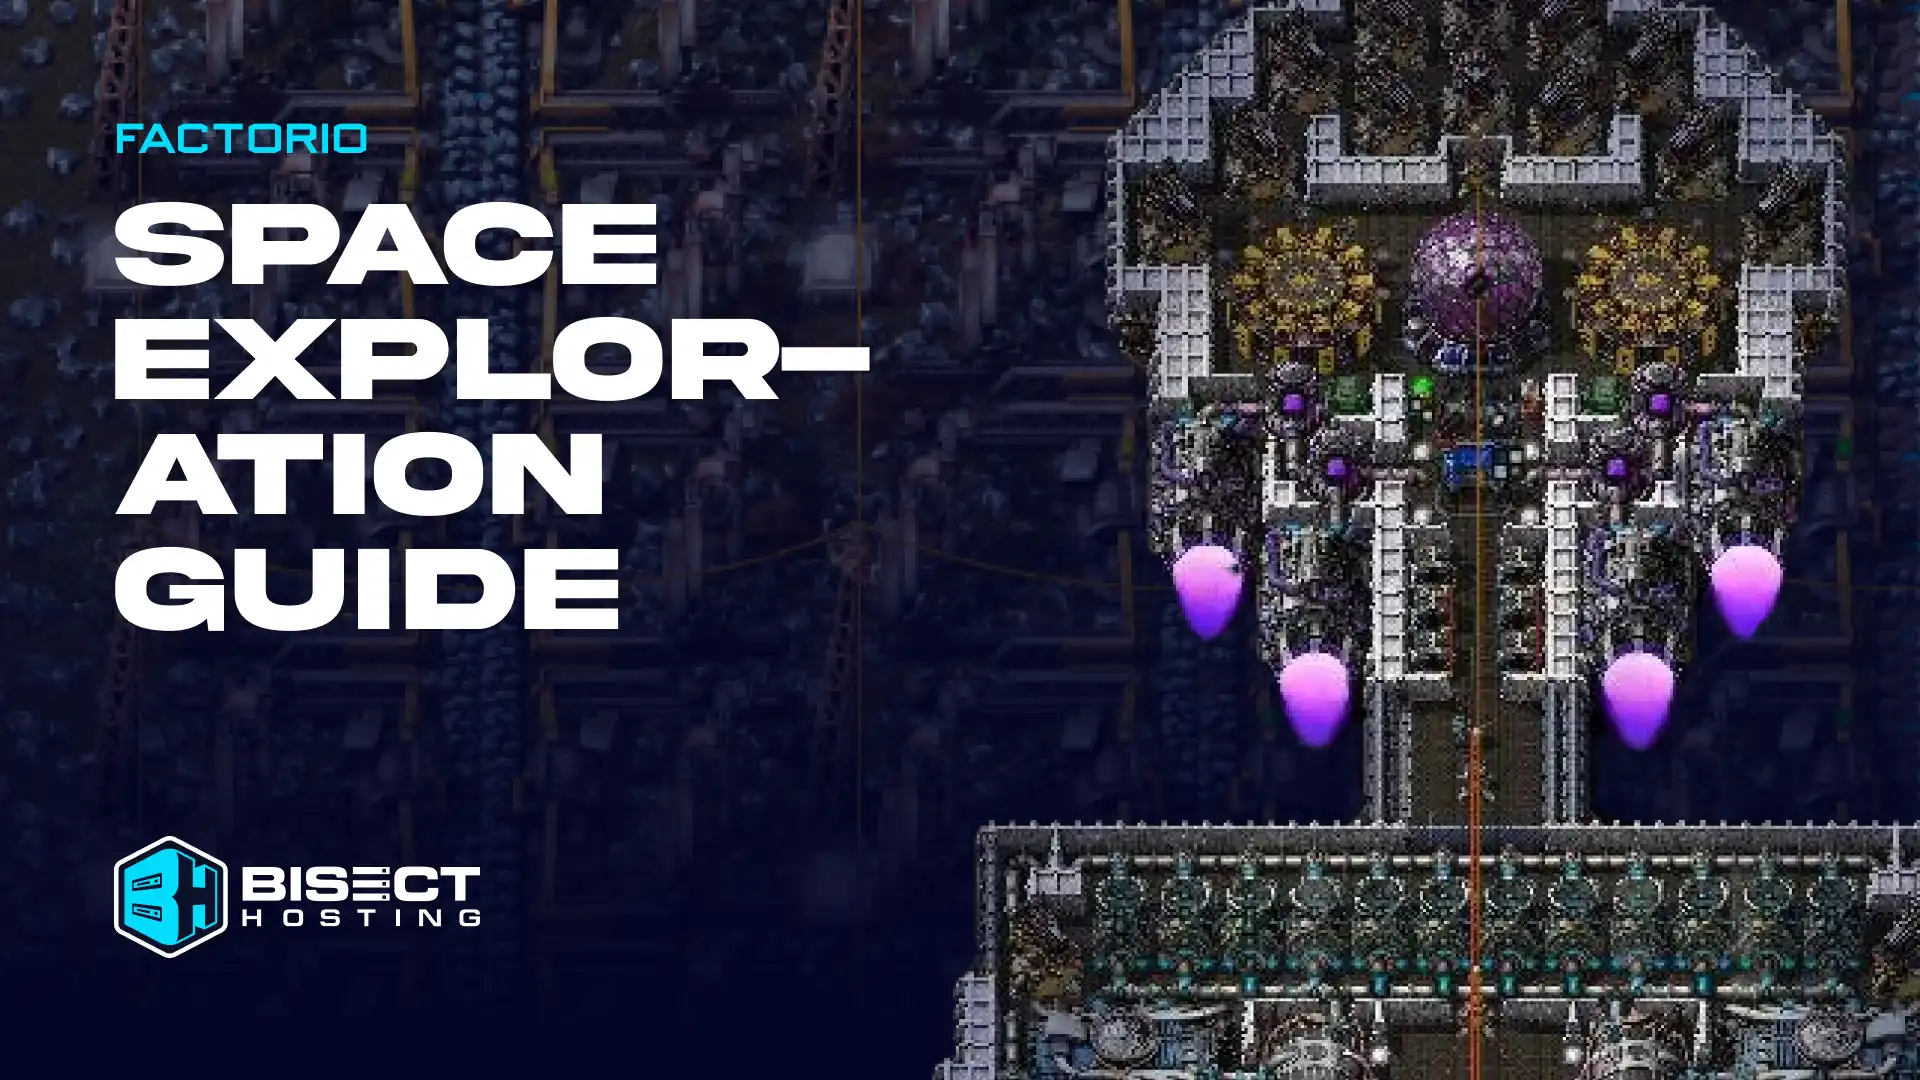 Factorio Space Exploration Mod Guide: New Planets, Resources, How to Install, & More